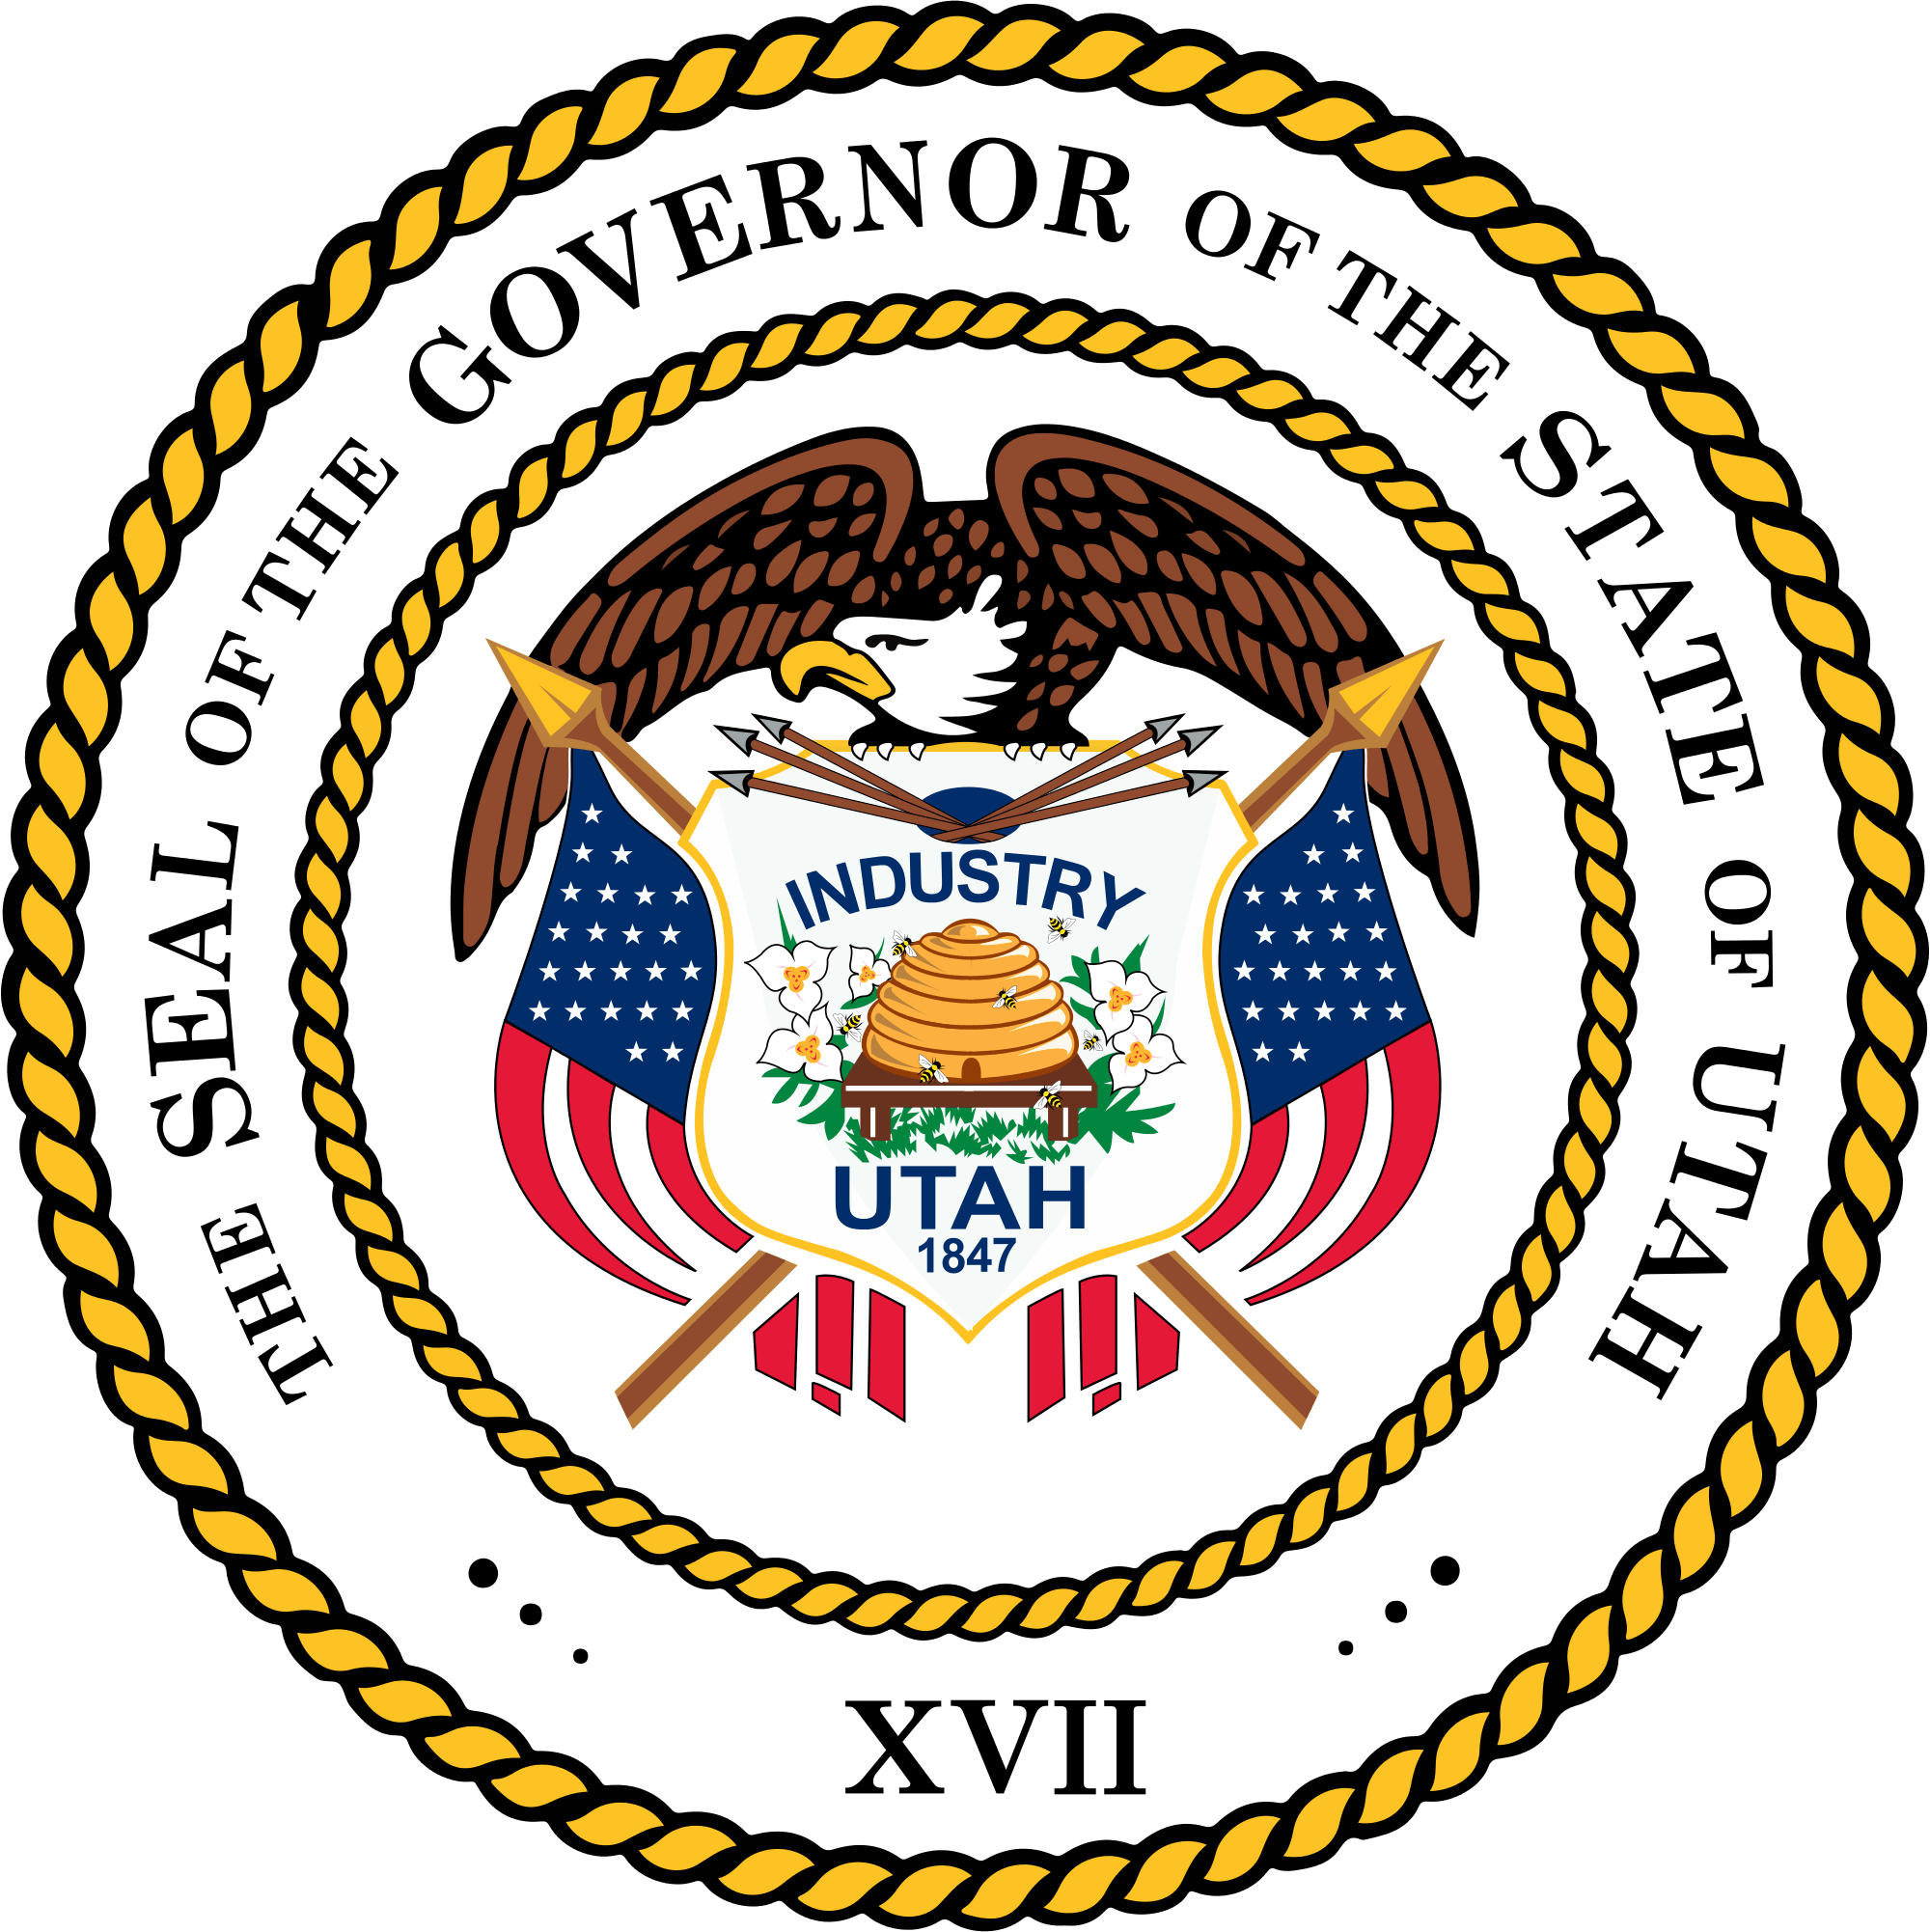 Utah State Tax Forms - Philippine Guidance And Counseling Association (2000x2002)